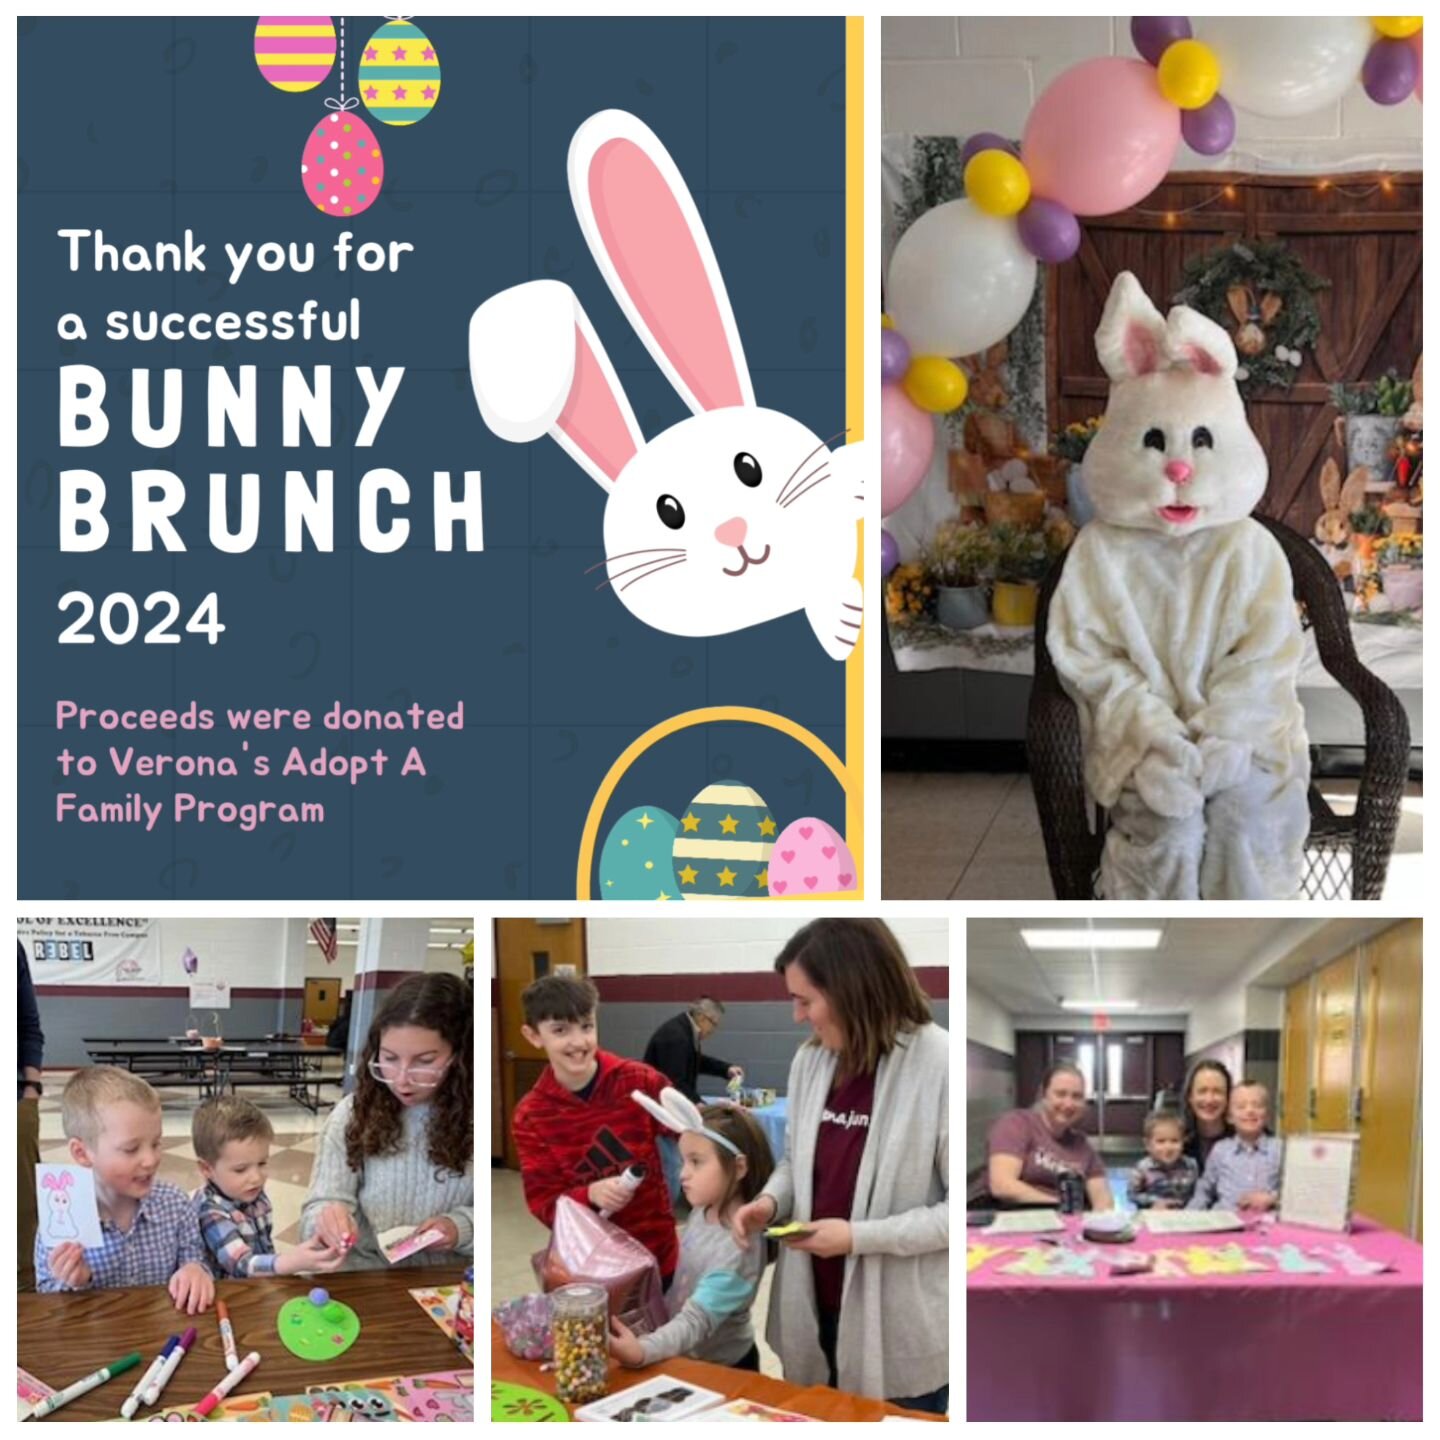 Thank you Verona! We hosted another successful Bunny Brunch this Sunday and donated proceeds to Verona's Adopt A Family program to help locals families in need. 

Huge thank you to our sponsors: @cedarbeanscoffeejoint @nothingbundtcakes West Caldwell